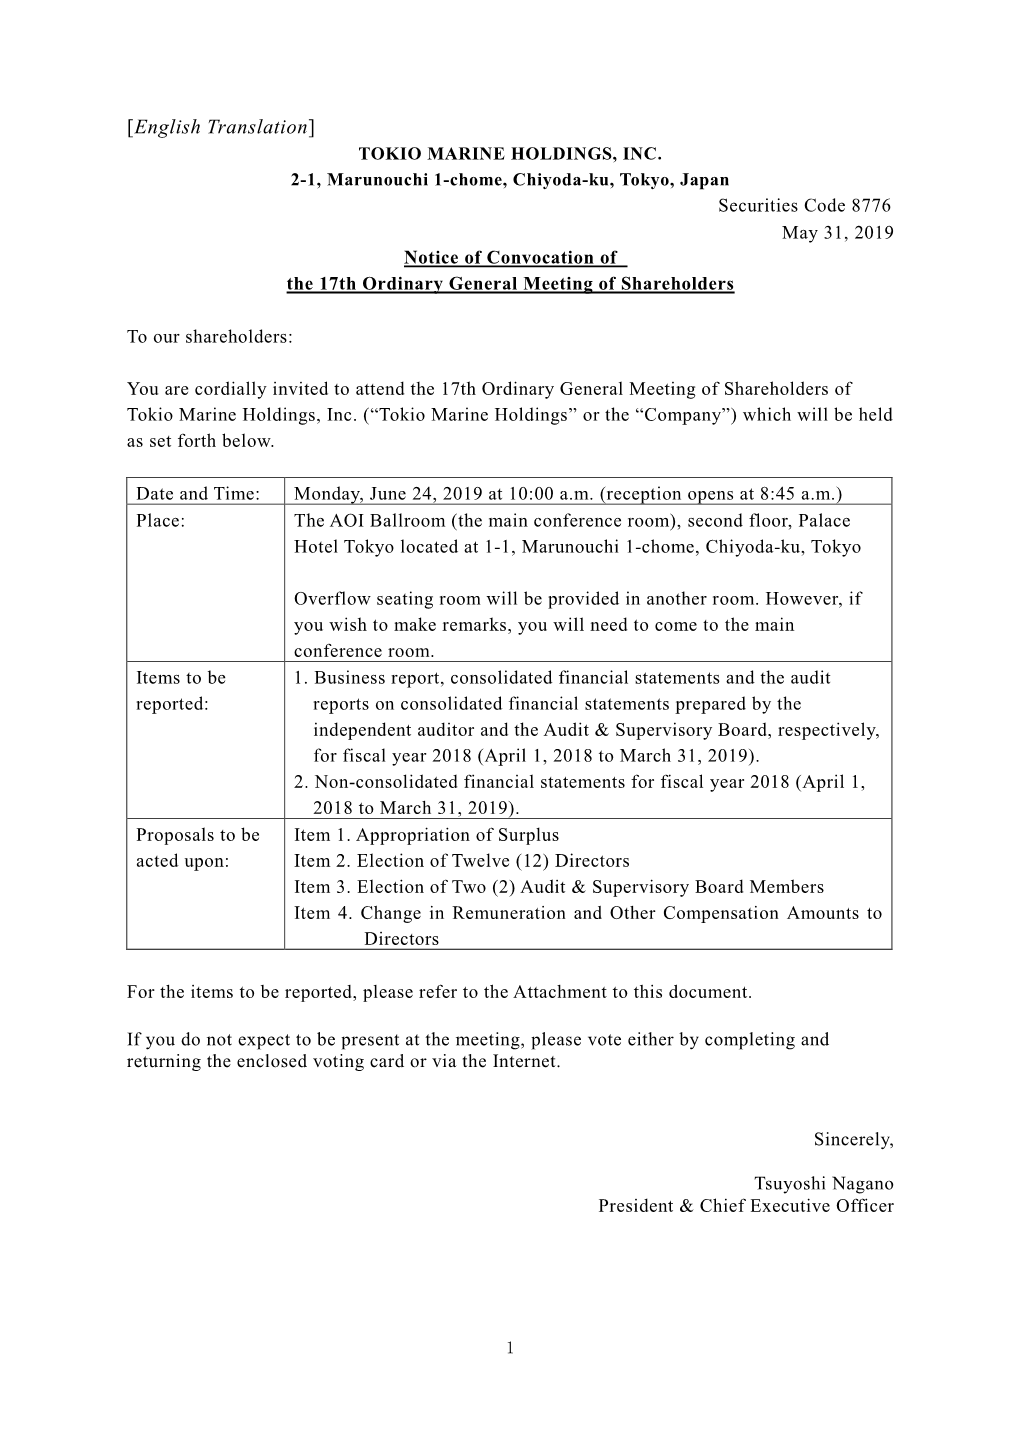 Notice of Convocation of the 17Th Ordinary General Meeting of Shareholders